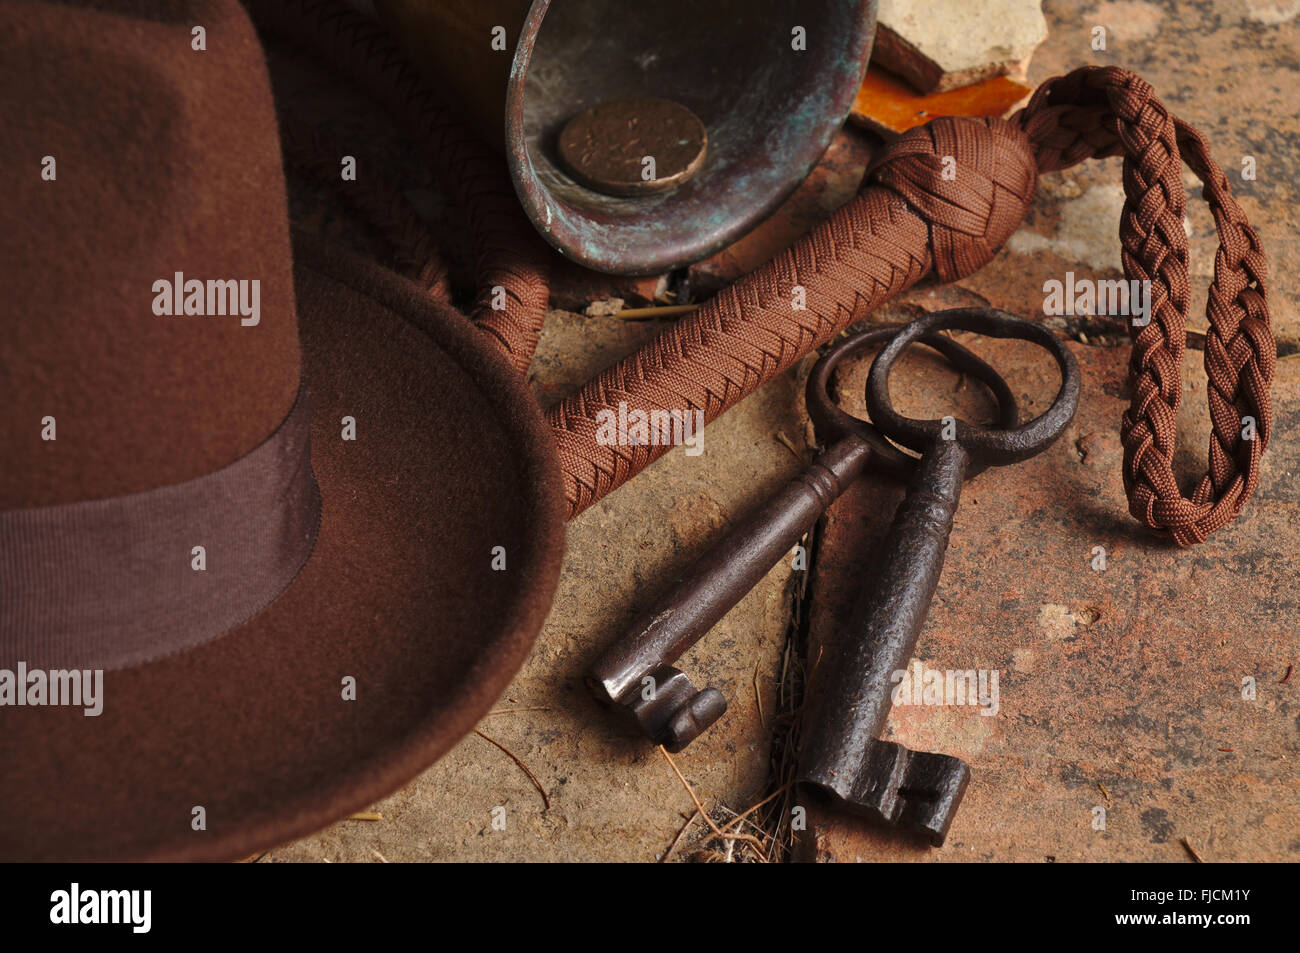 Indiana Jones related items: Fedora hat, whip, knife, antique skeleton keys and other artifacts. Themed photography Stock Photo